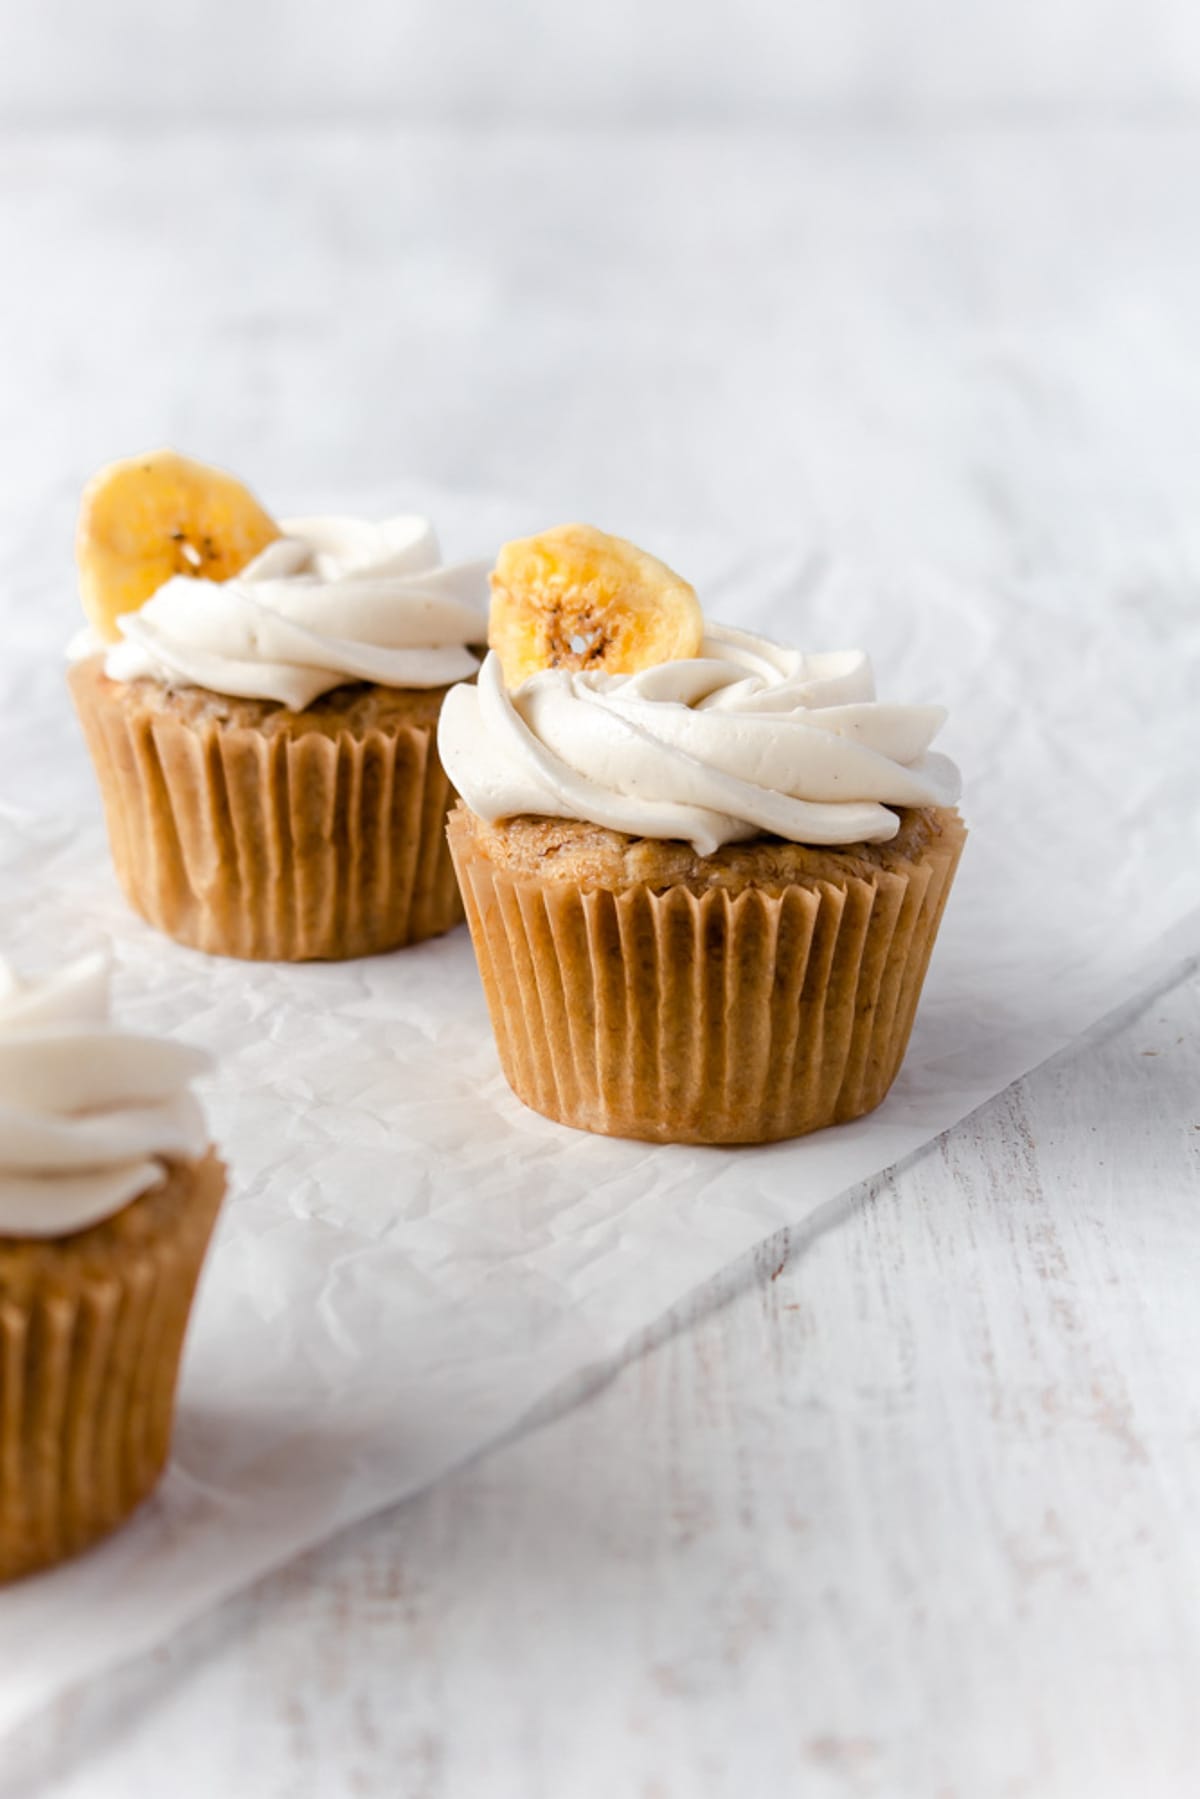 Two banana cupcakes on a piece of parchment paper with another cupcake off to the side.